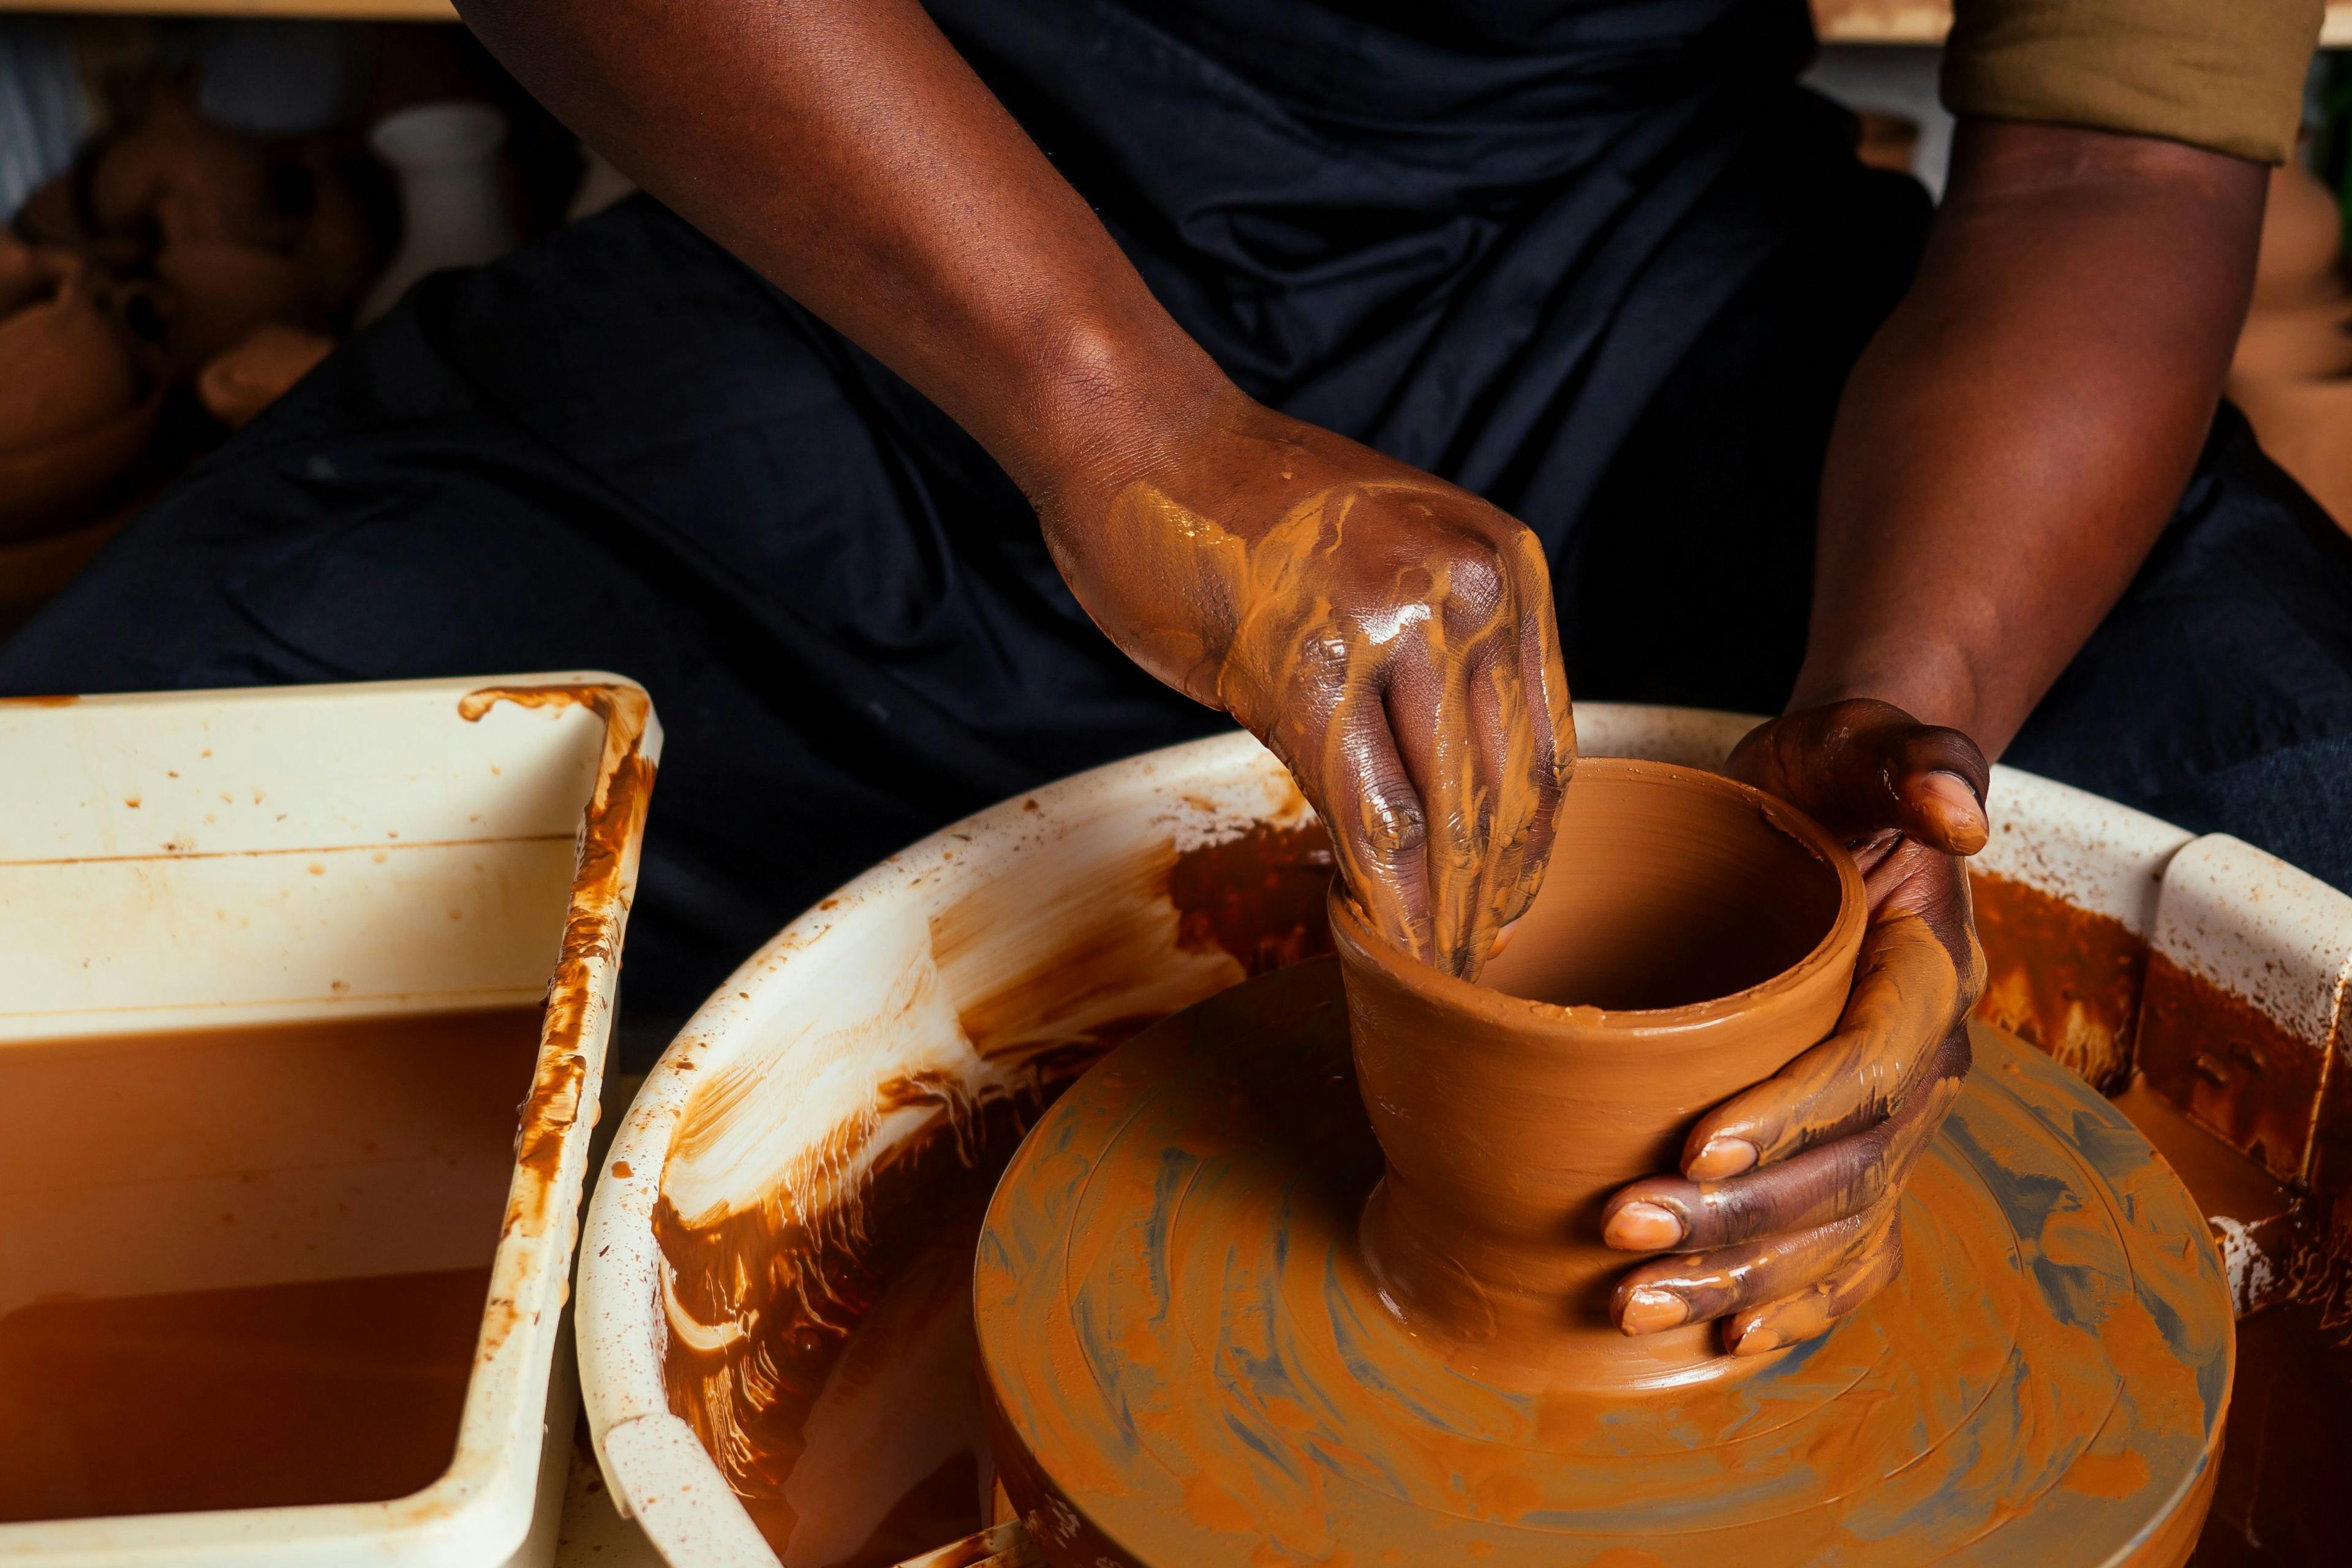 “Pottery is life. The finished product is just a reminder of the steps taken on the way.”